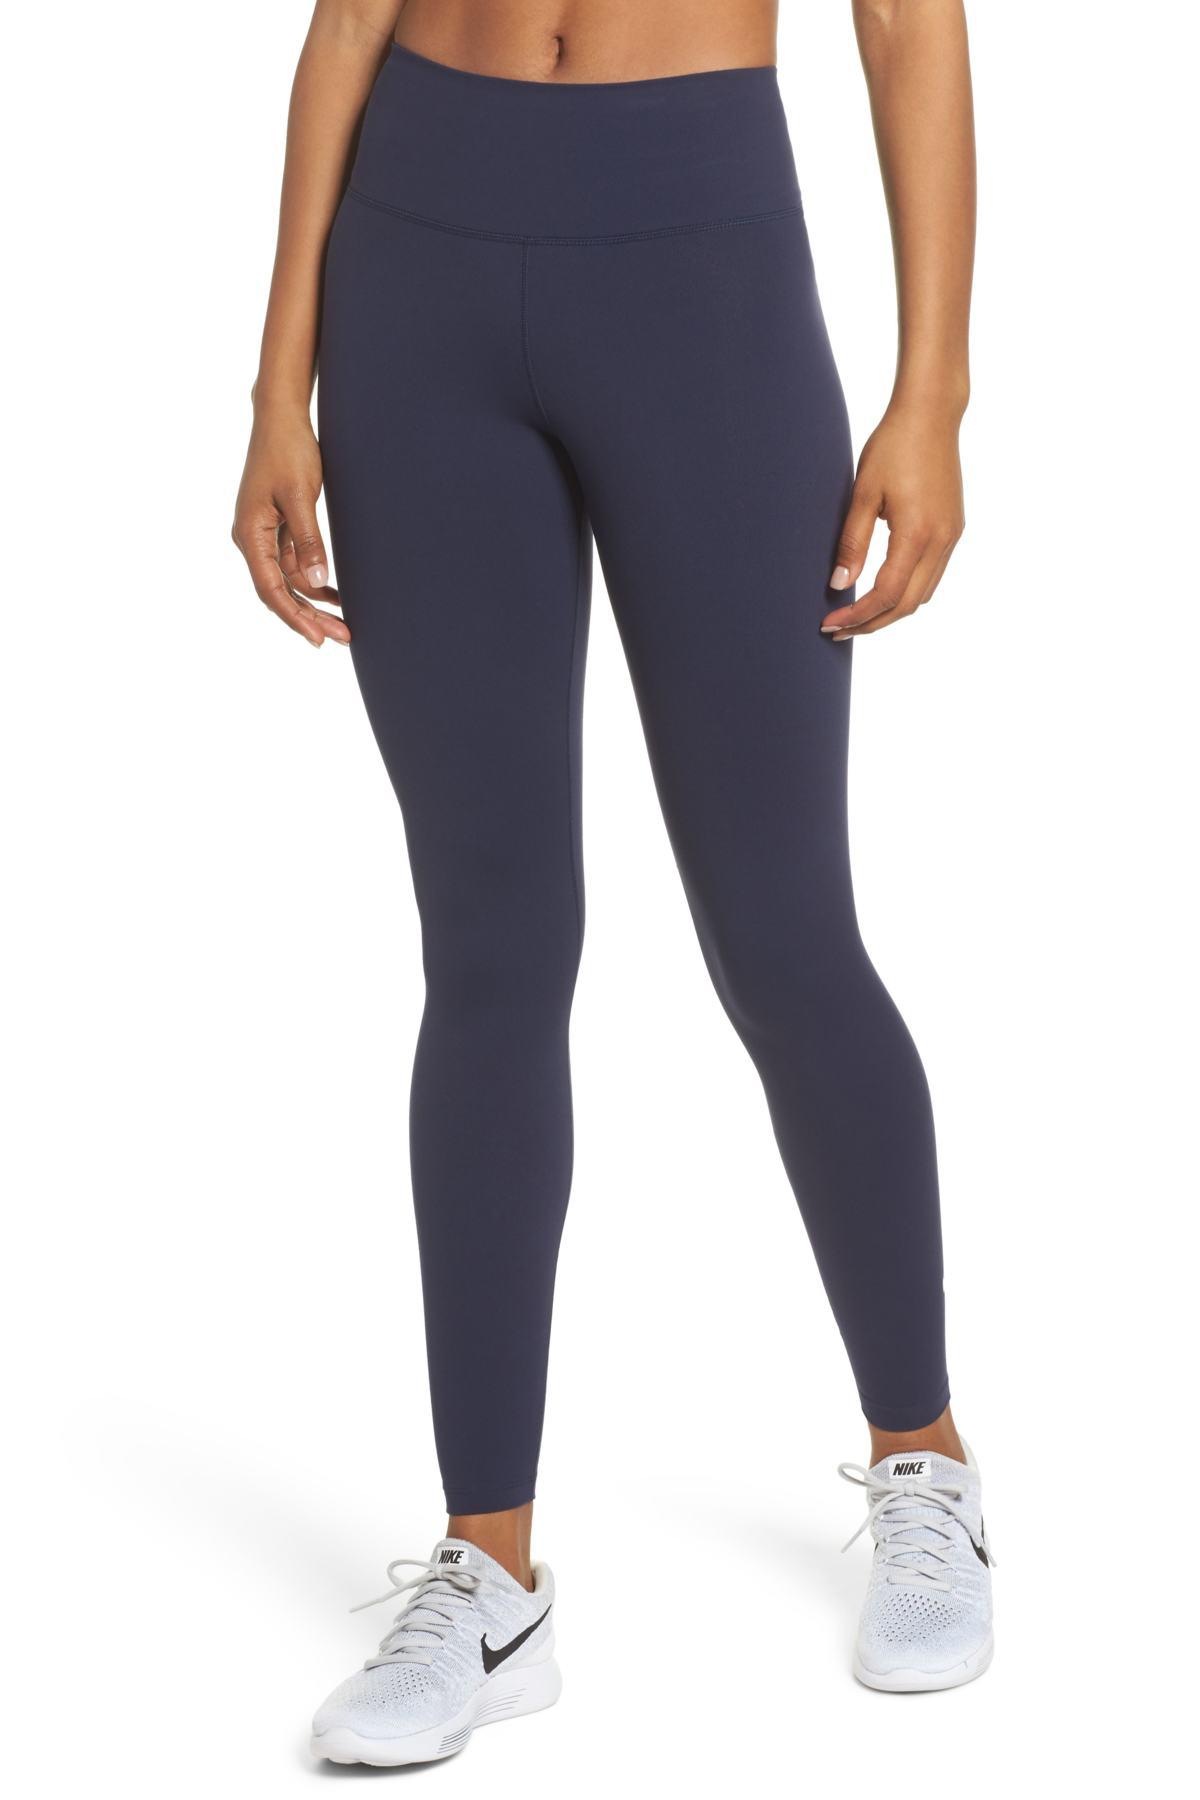 Nike Sculpt Lux Training Tights in Blue 